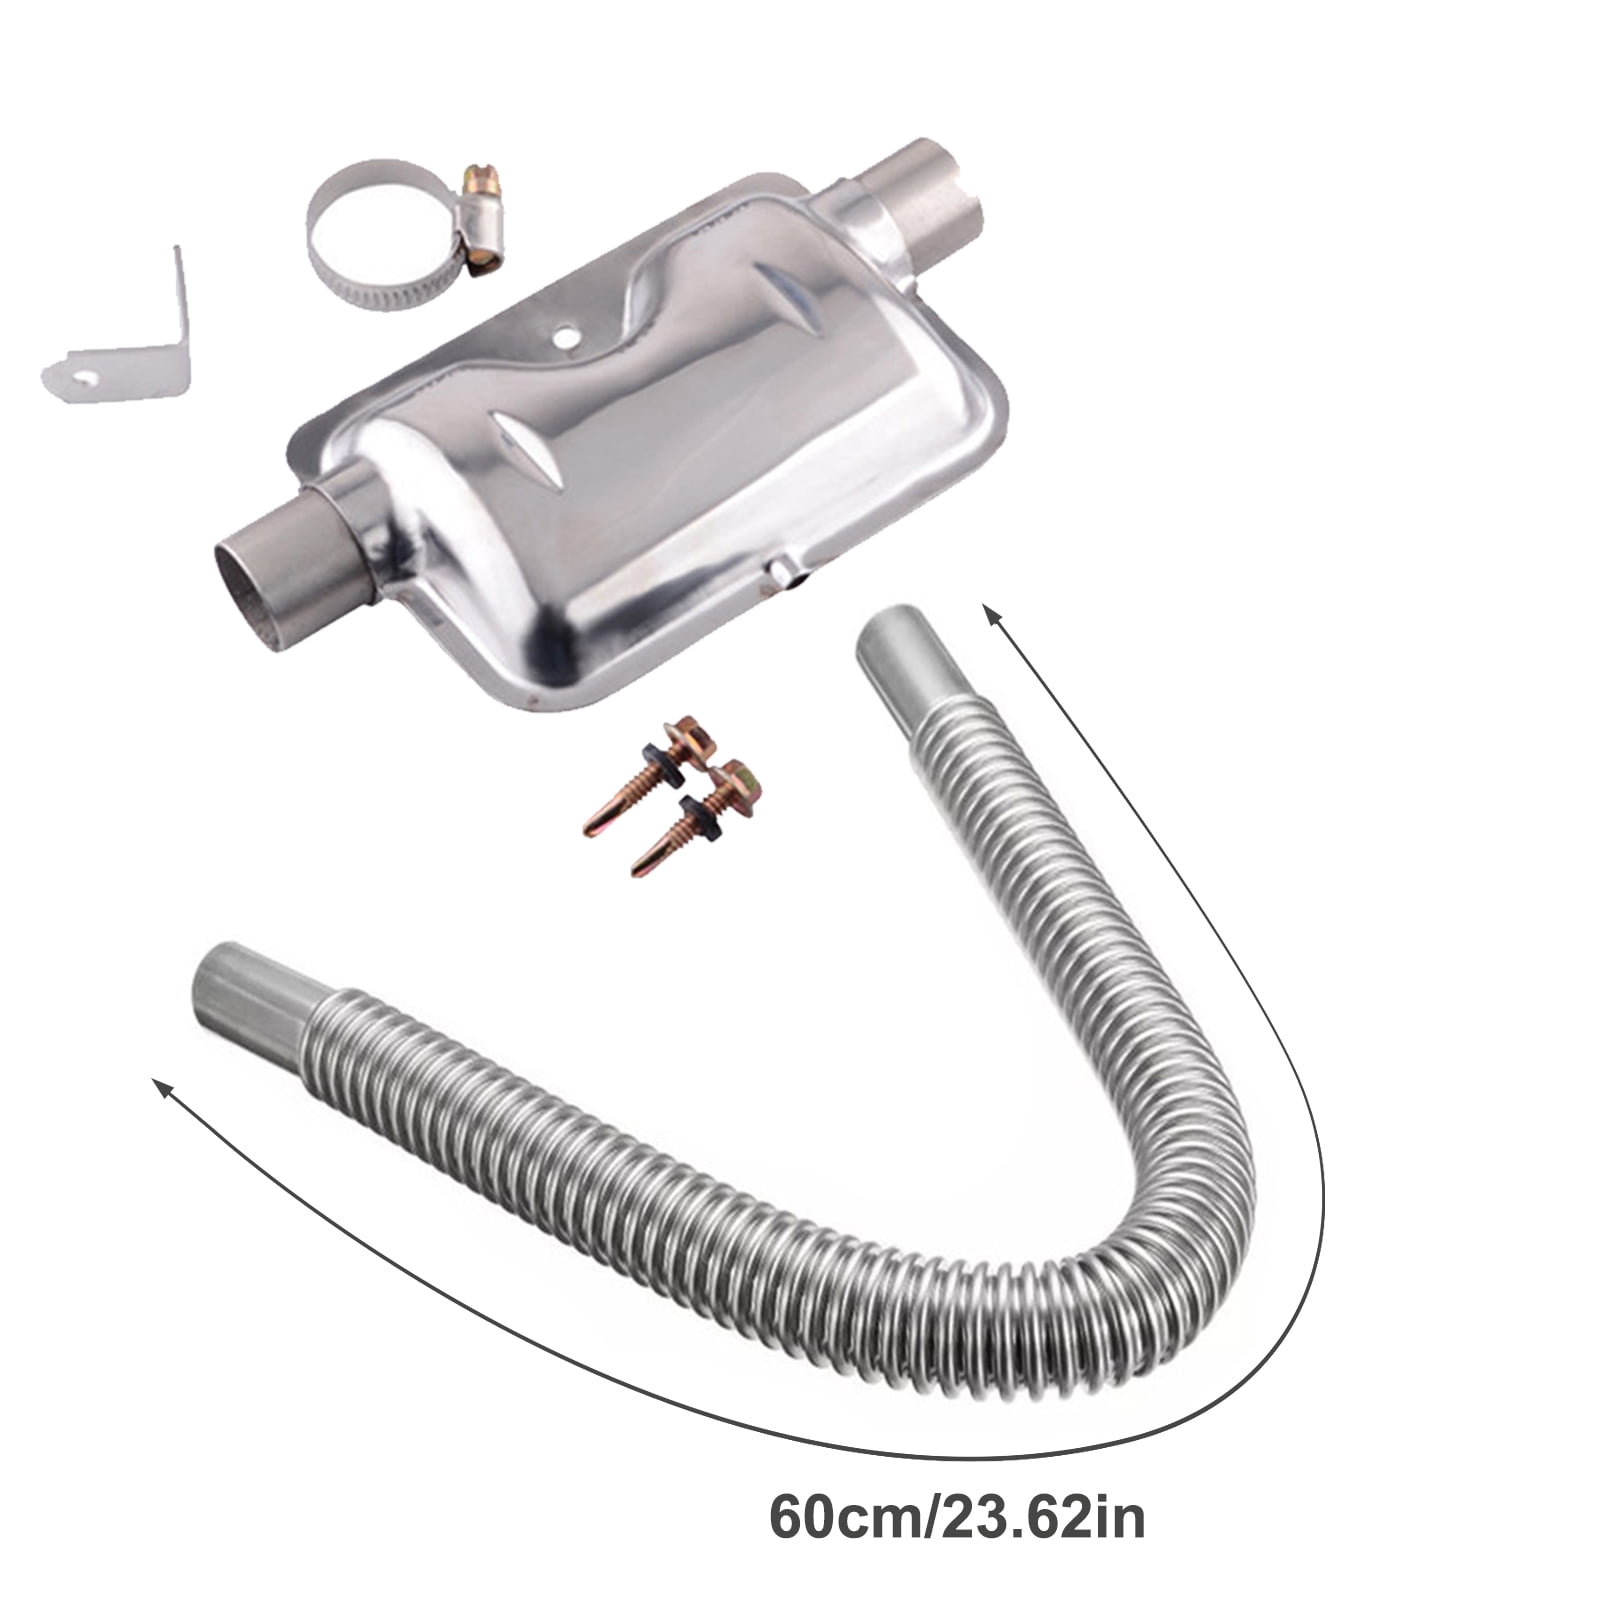 2020 Upgraded Stainless Steel Exhaust Pipe & Muffler Kit for Parking Air Diesel Heaters,Exhaust Pipe Silencer Heater Kit,Car Heater Accessories Exhaust Muffler 60/150/200CM